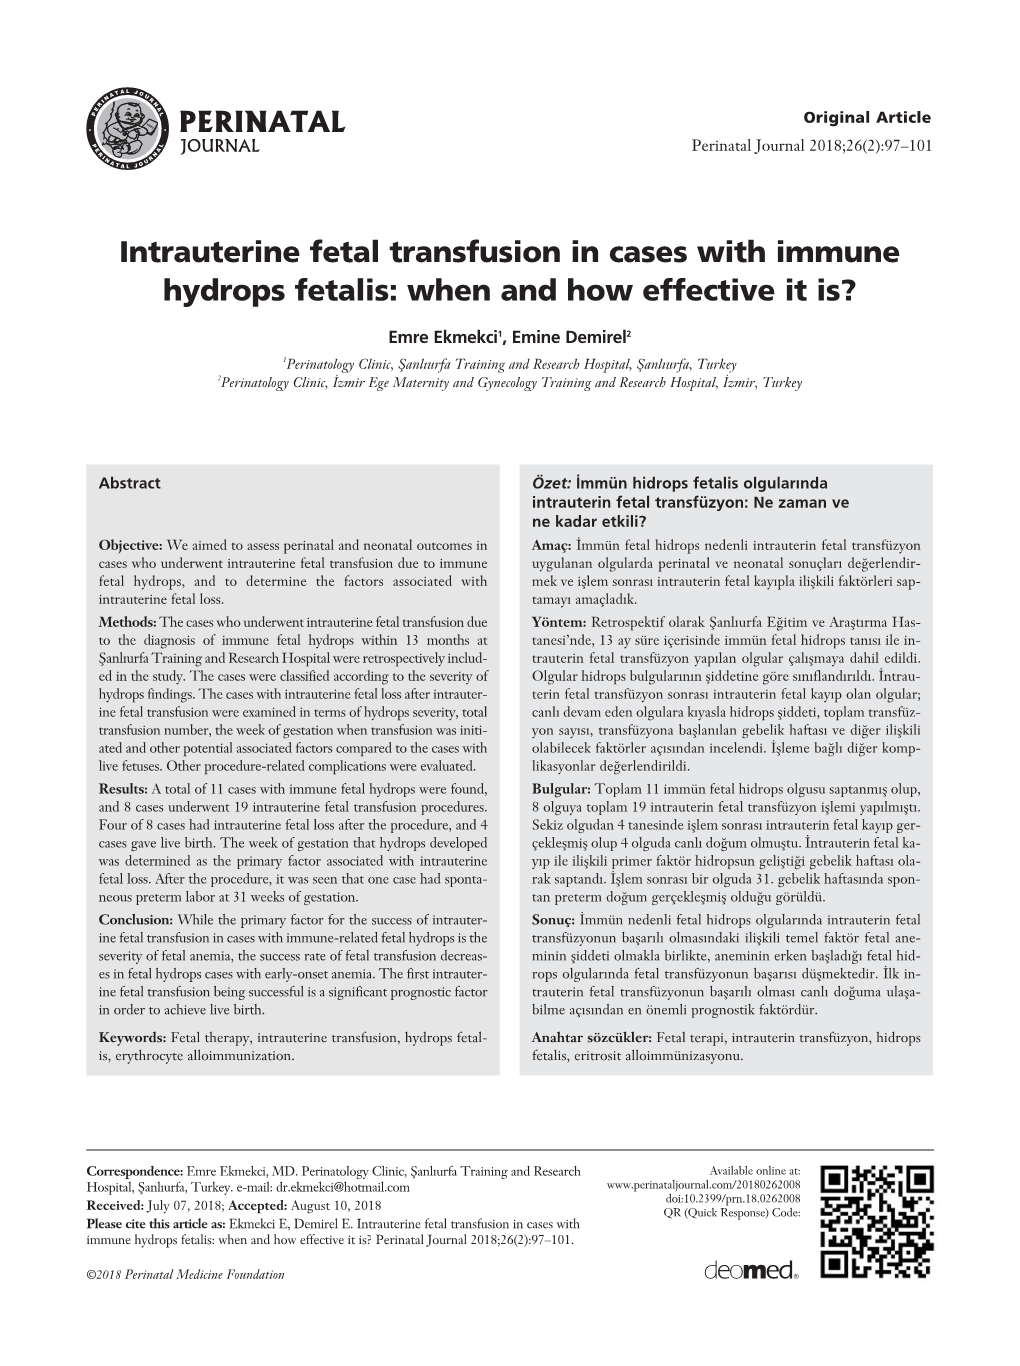 Intrauterine Fetal Transfusion in Cases with Immune Hydrops Fetalis: When and How Effective It Is?